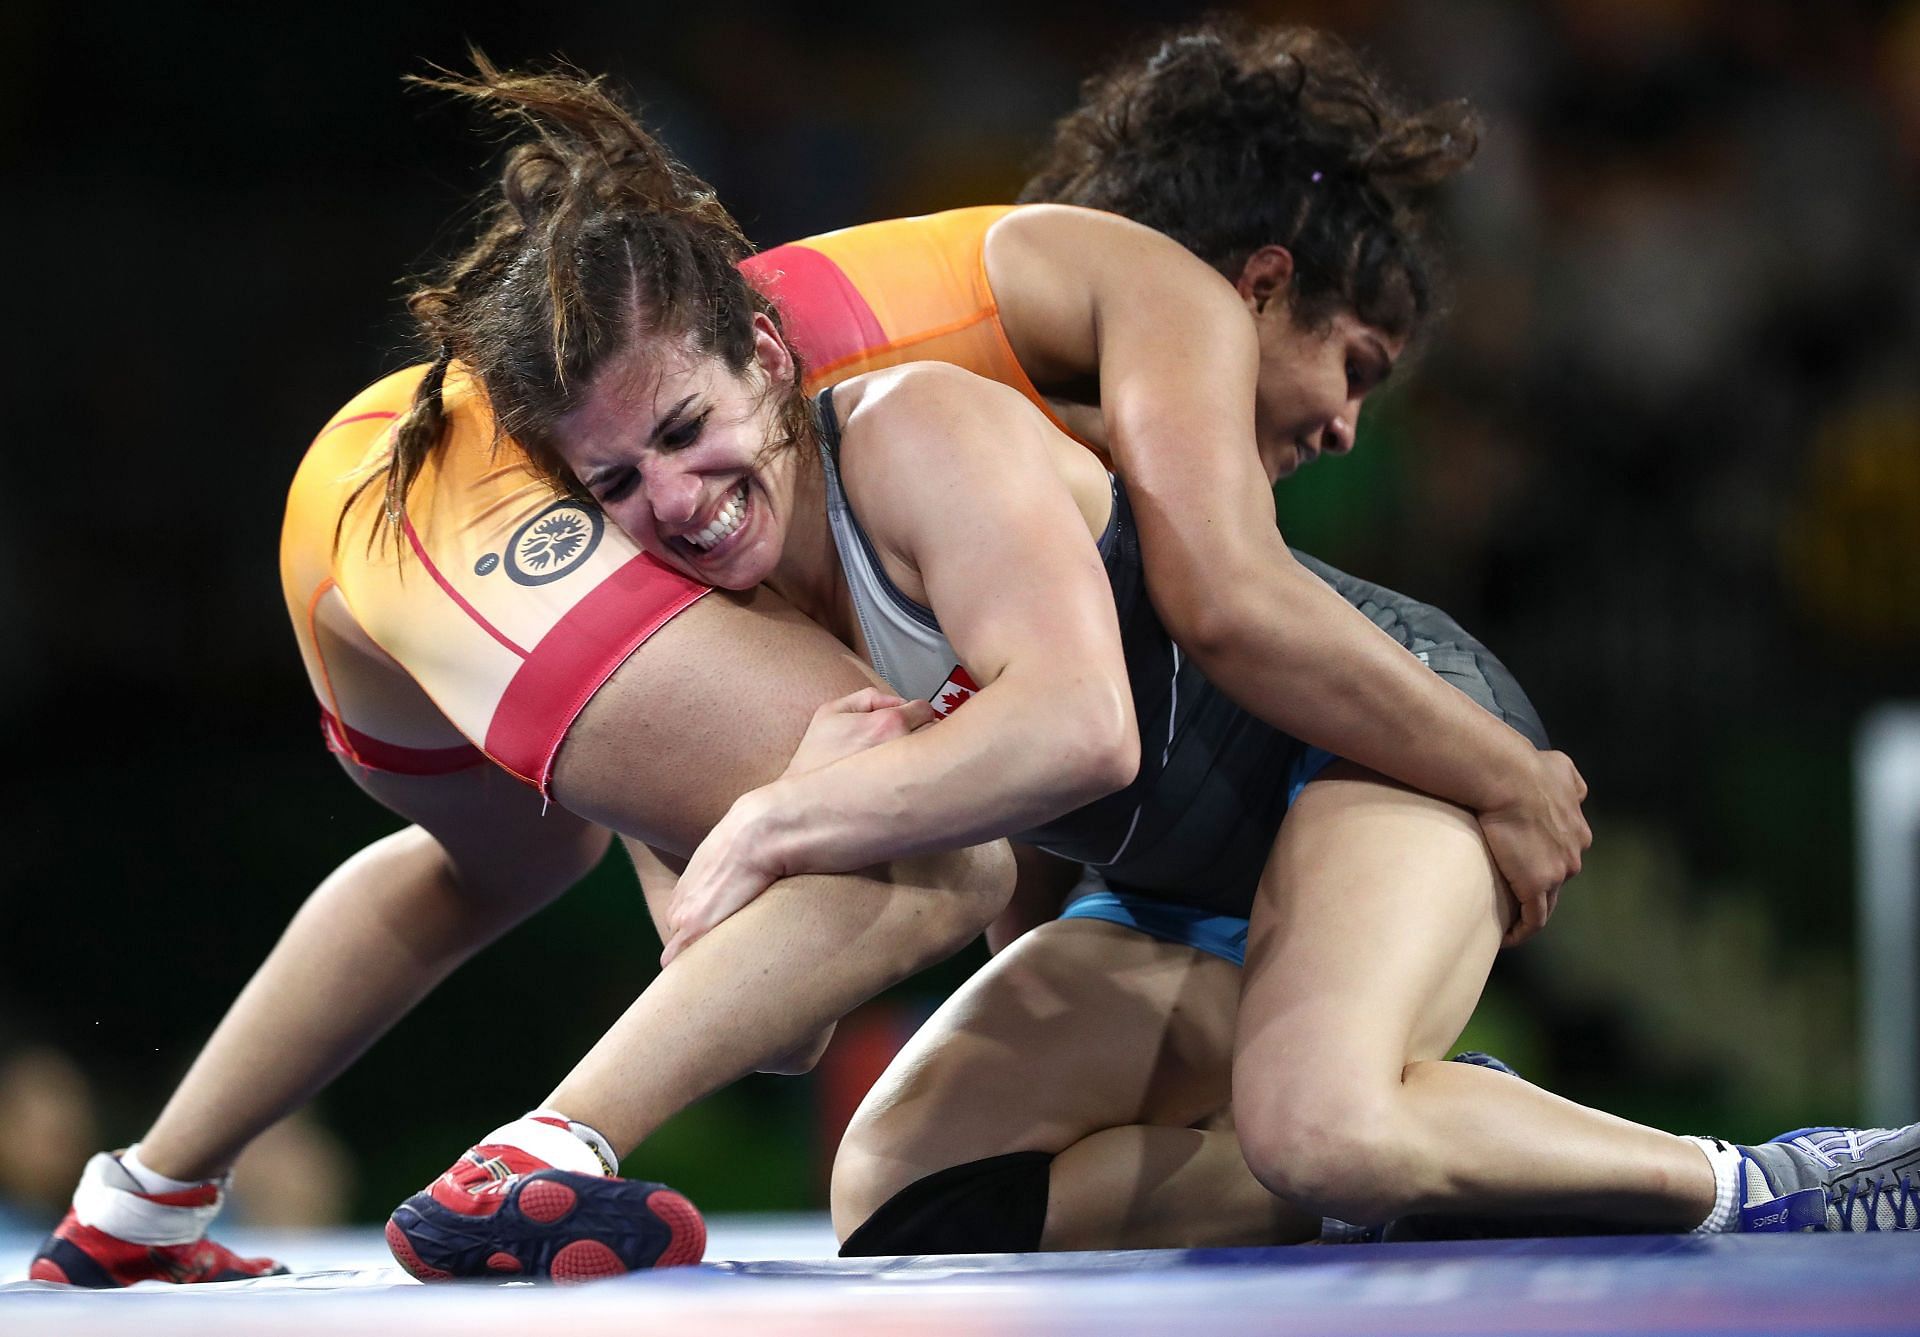 Sakshi Malik (in orange) in action at the 2018 Commonwealth Games (Image courtesy: Getty Images)